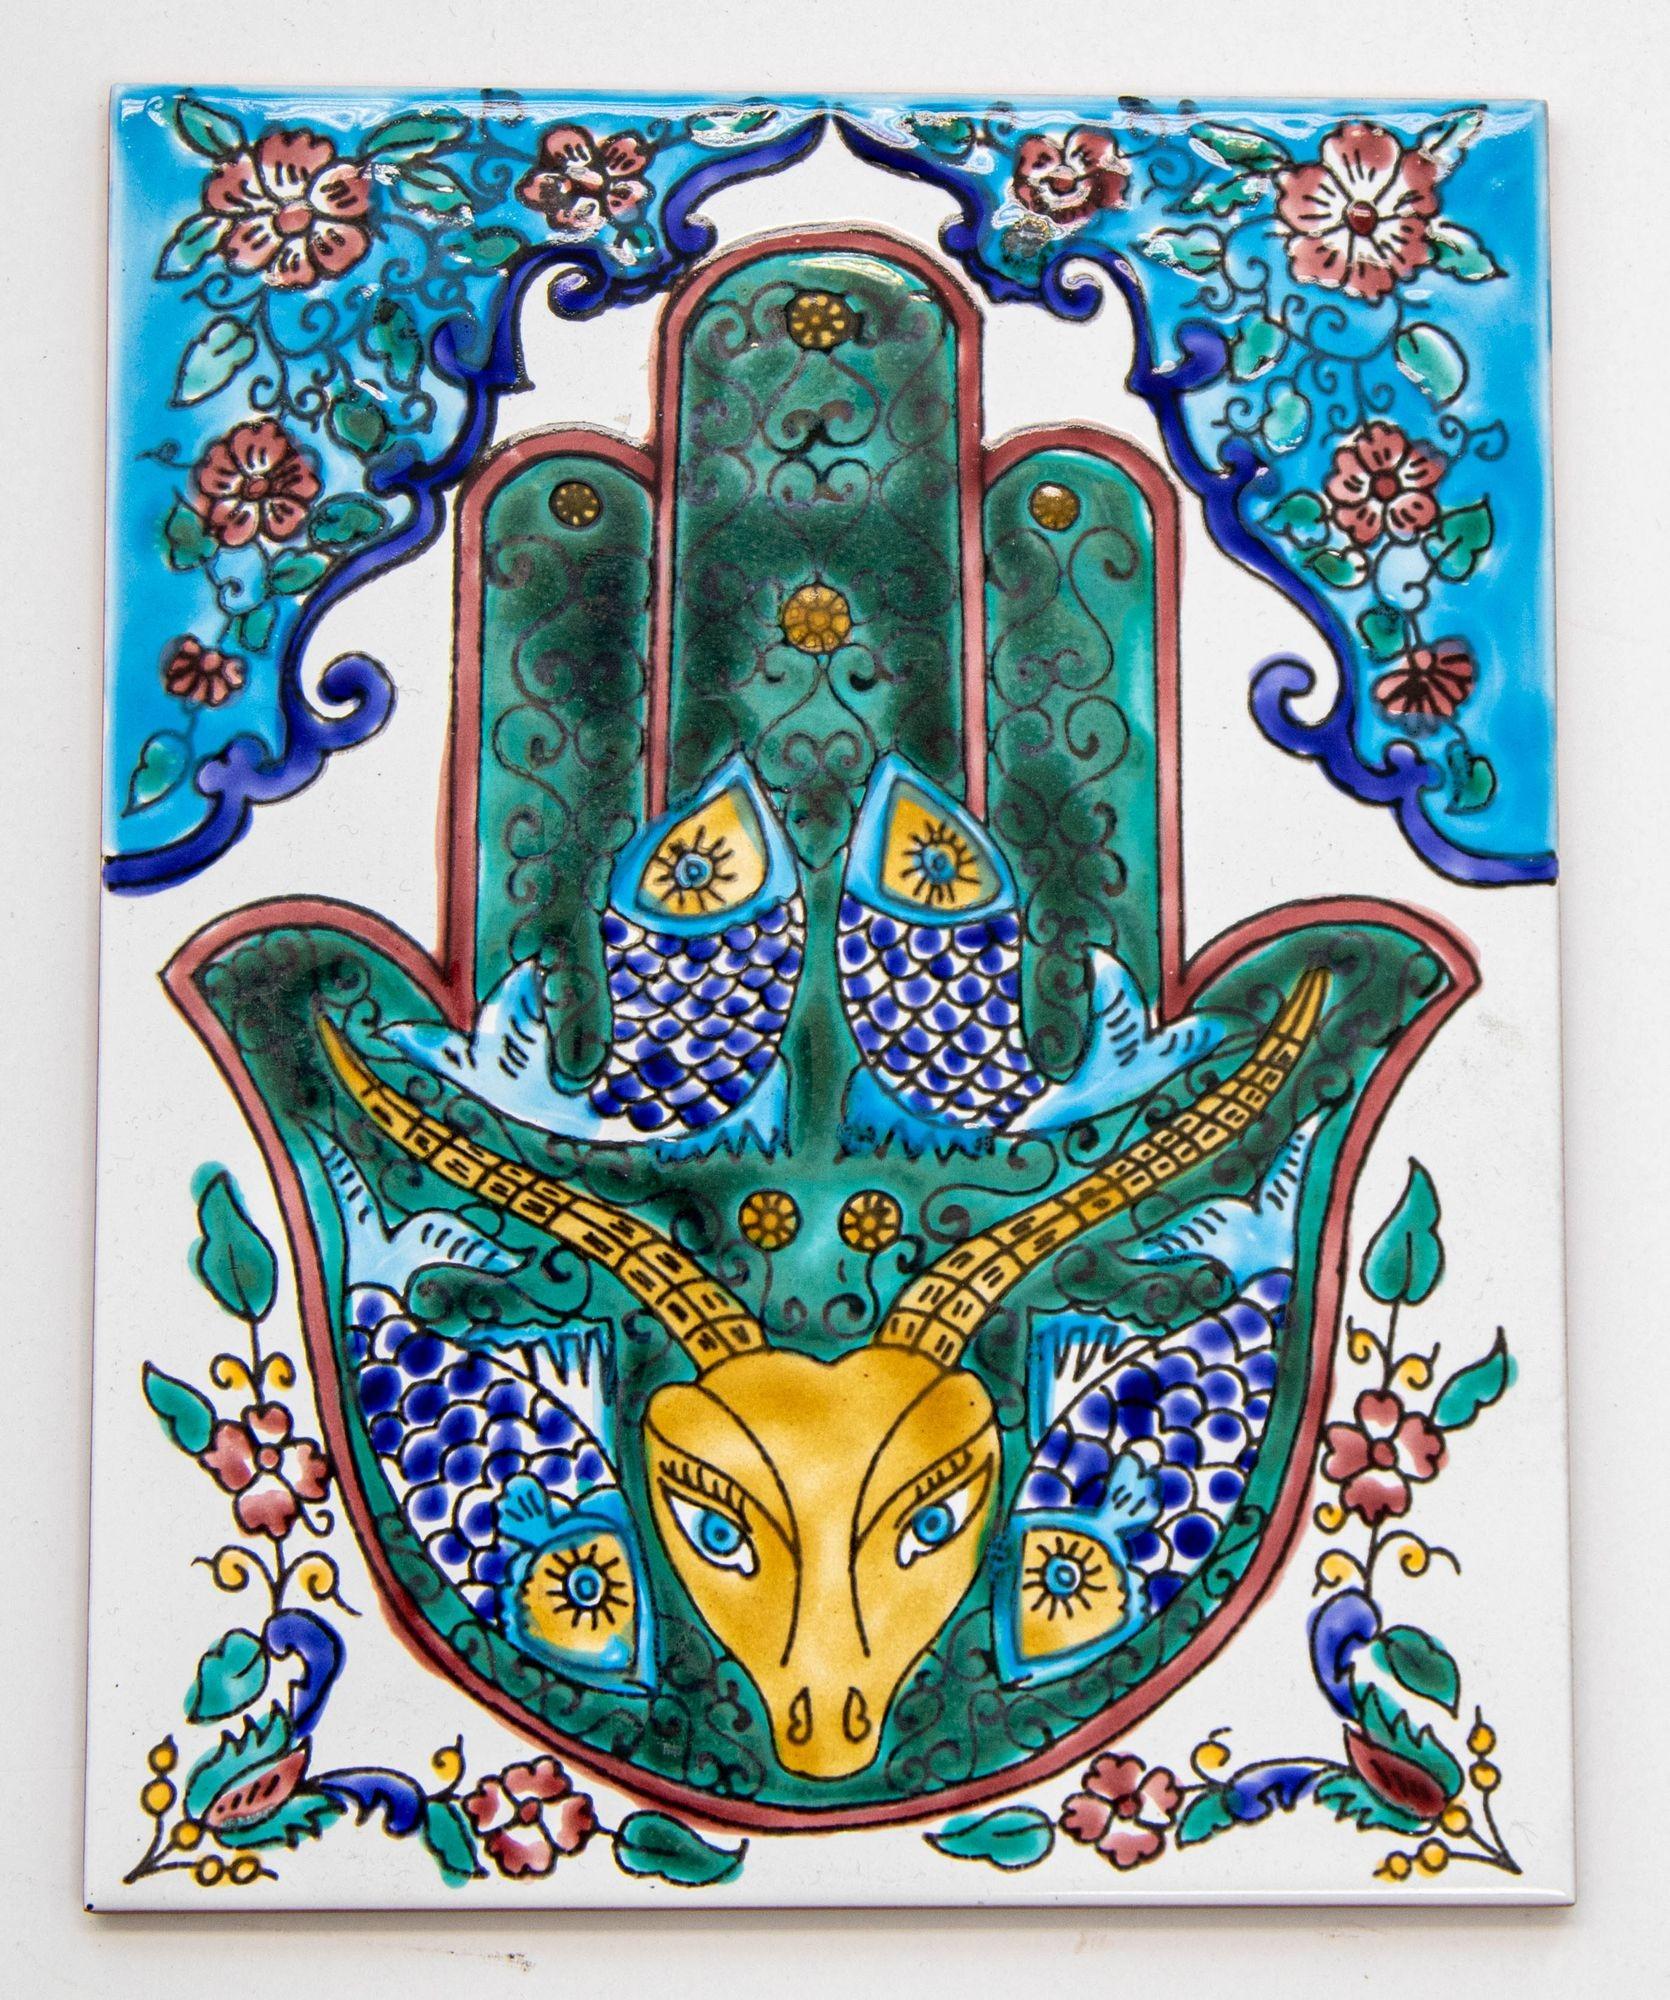 Vintage Islamic Moroccan tile with the Hand of Fatima, pair of Fishes and a Gazelle, the Hand of Fatima is here to protect against negative energy, fishes and the gazelle are to bring good energy for business and wealth homes.
The Hand of Fatima,